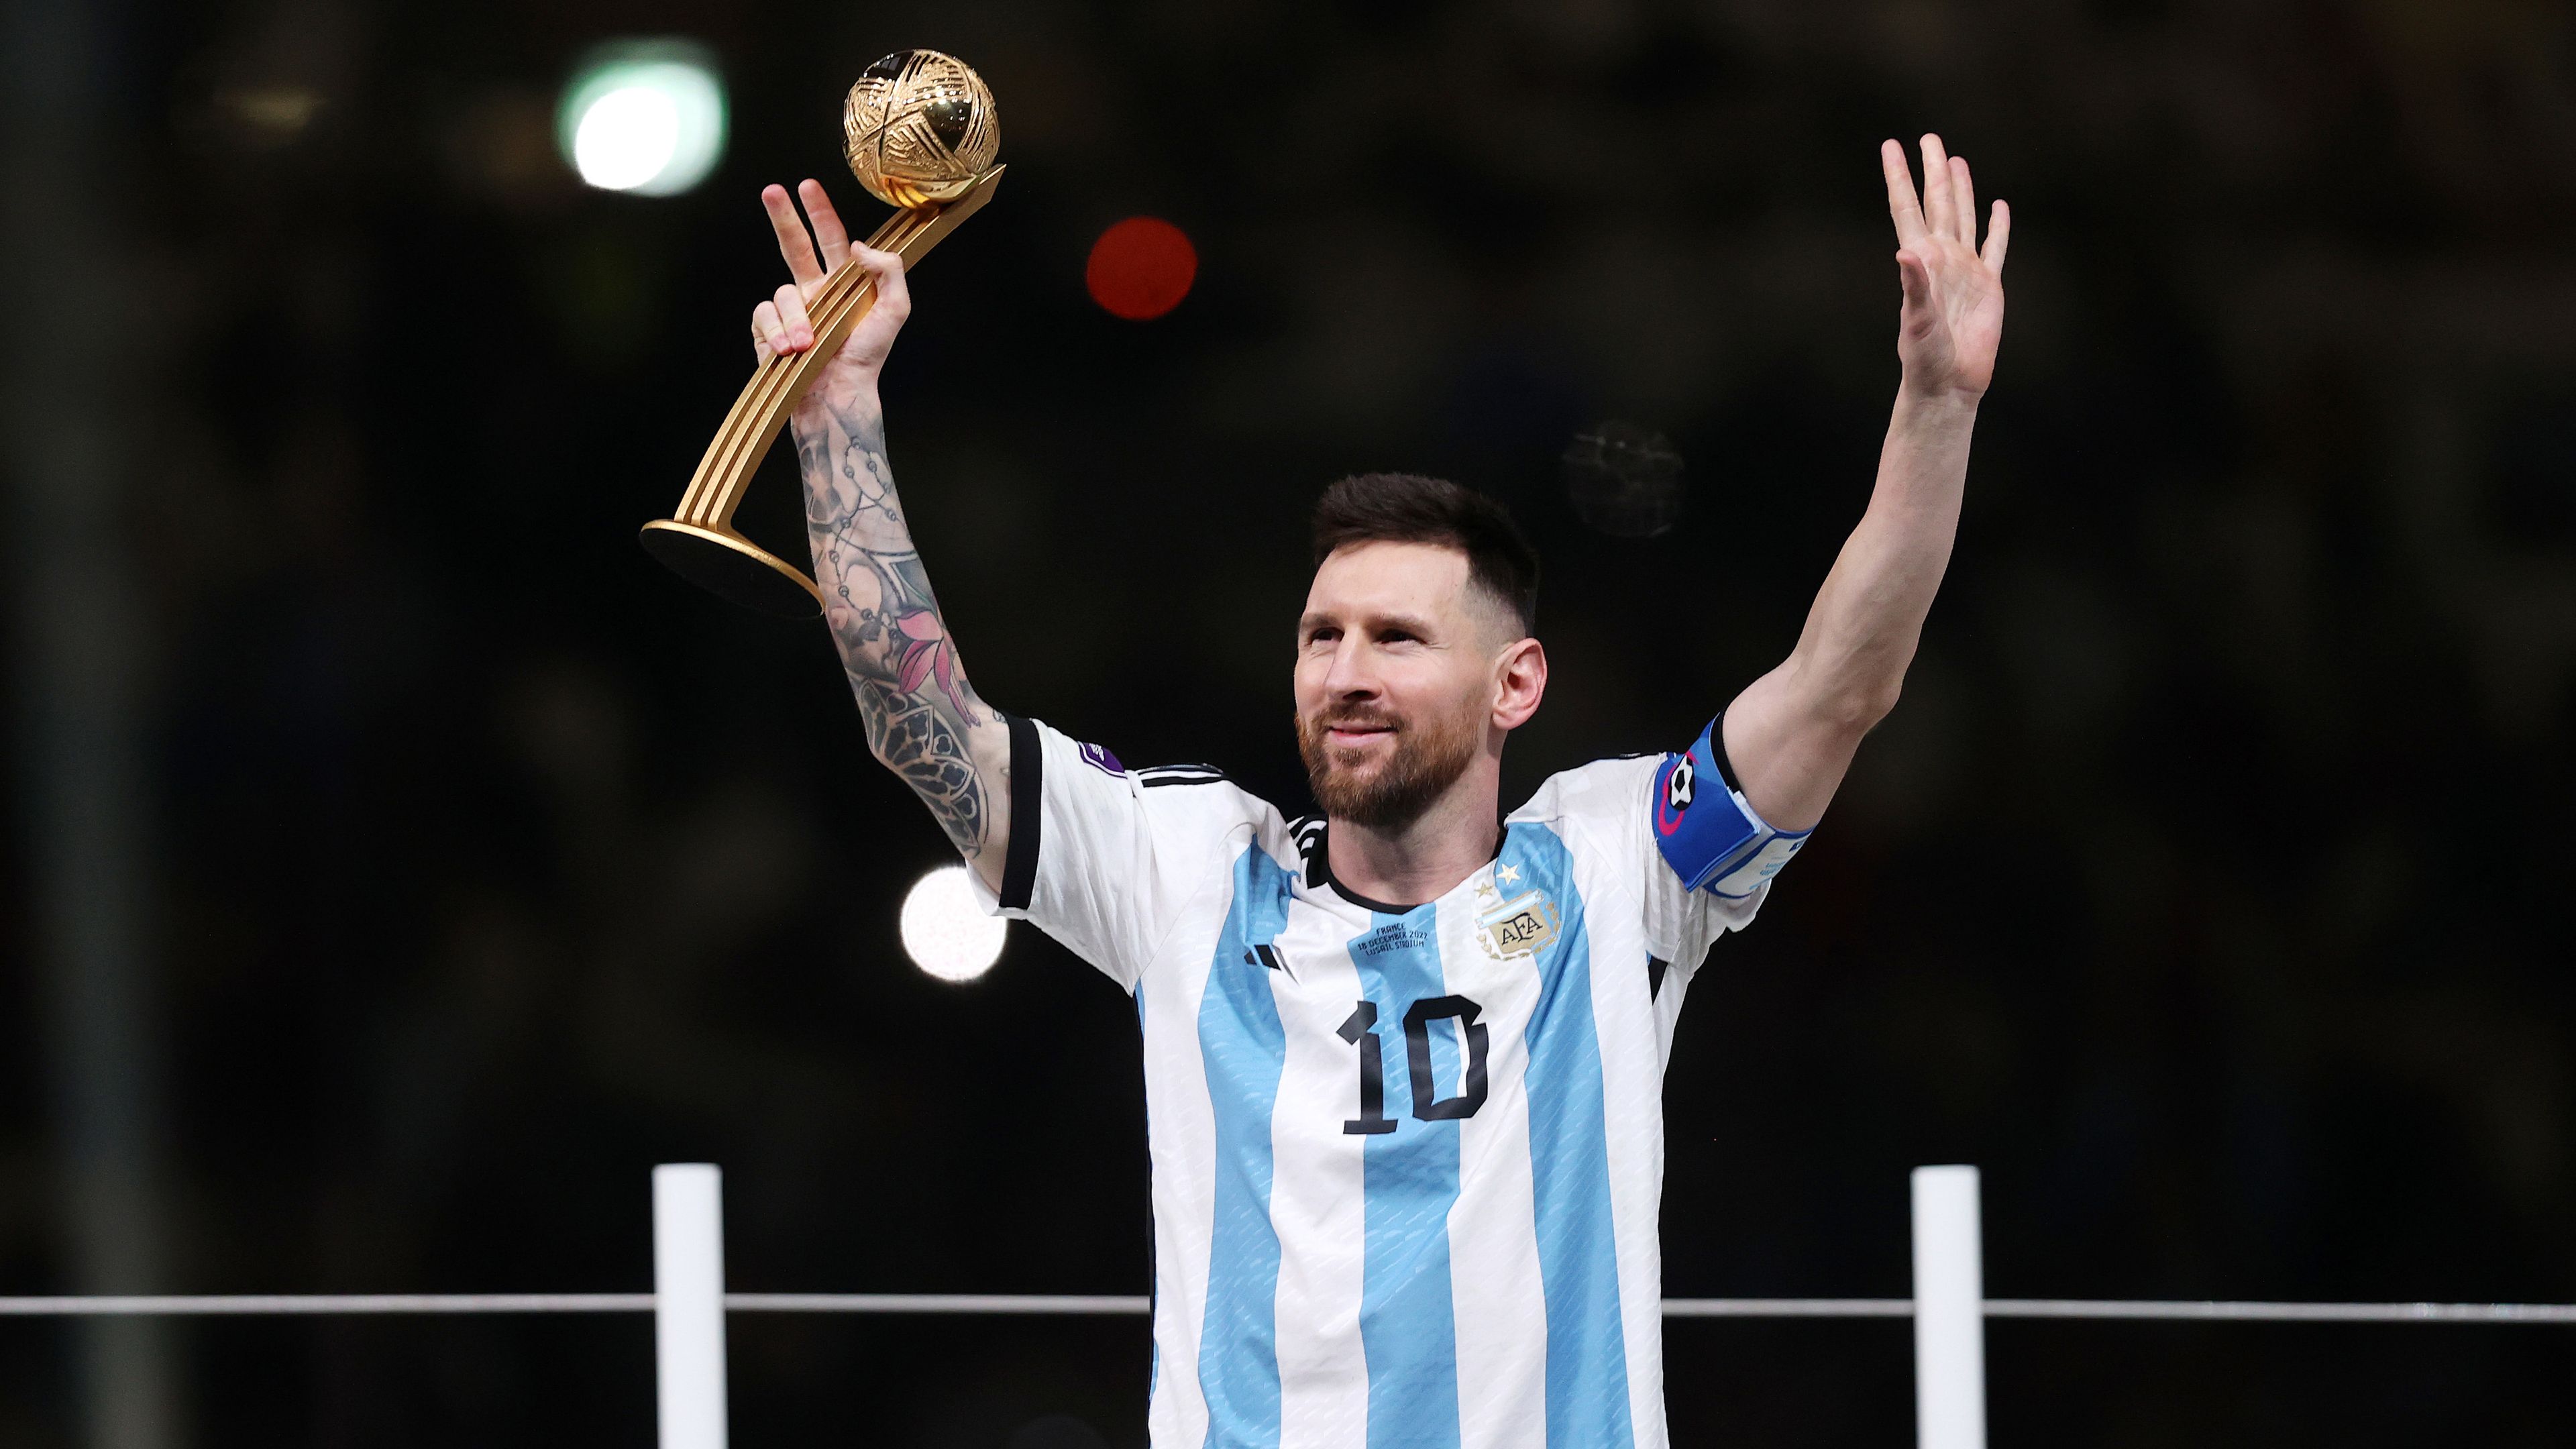 Everything to know about Lionel Messi: Trophies, contract, salary